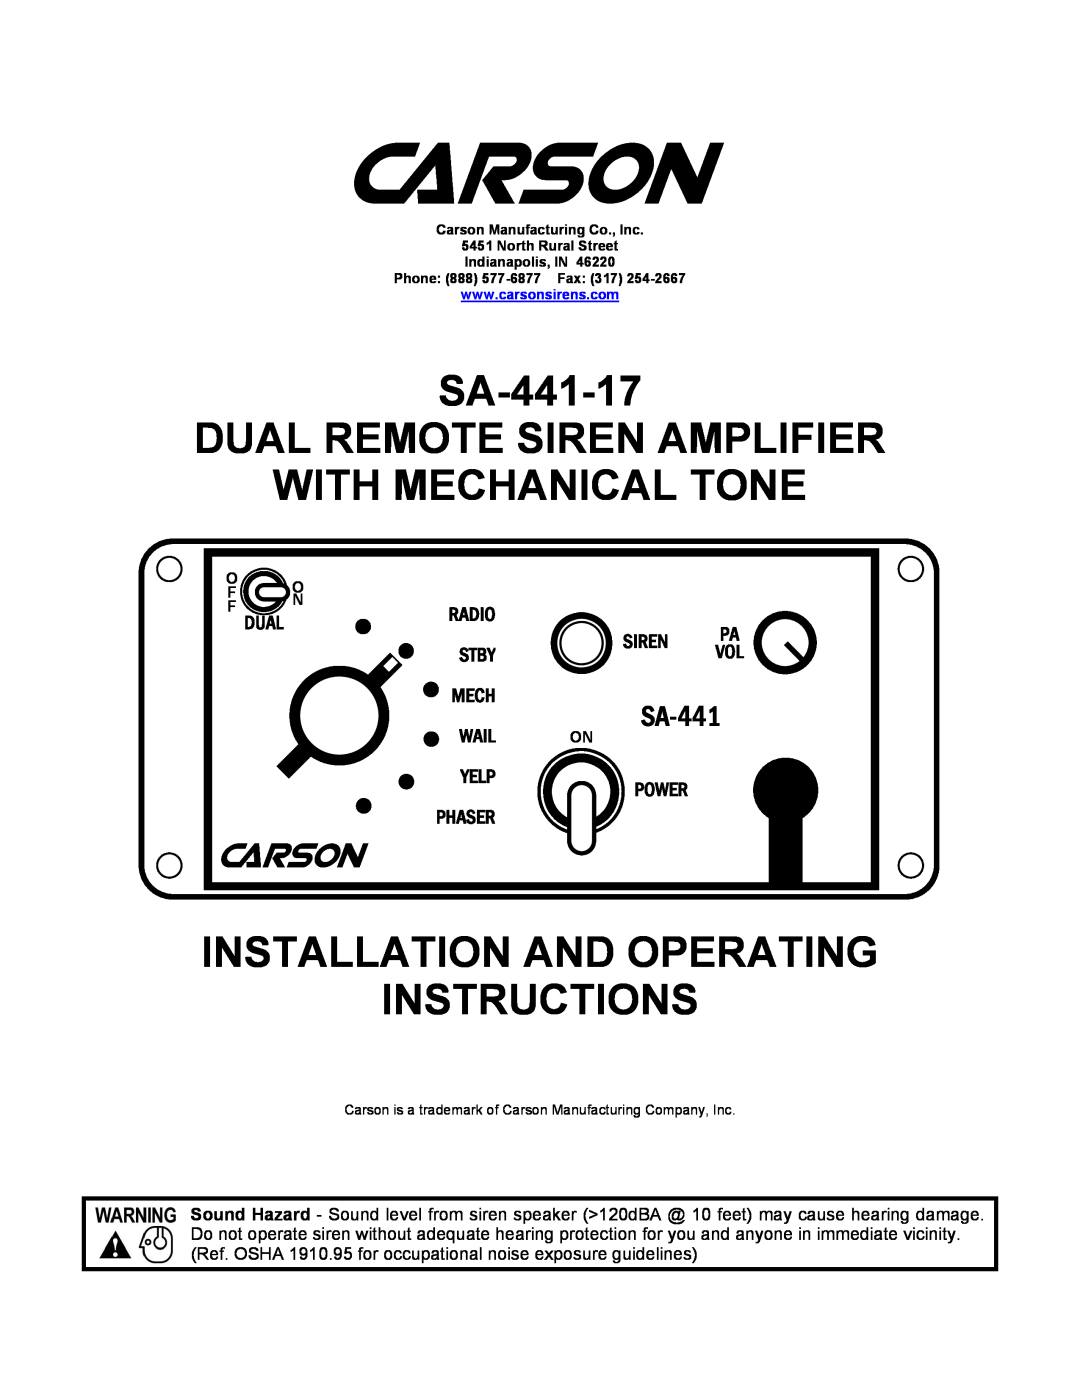 Carson manual SA-441-17 DUAL REMOTE SIREN AMPLIFIER, With Mechanical Tone, Installation And Operating Instructions 